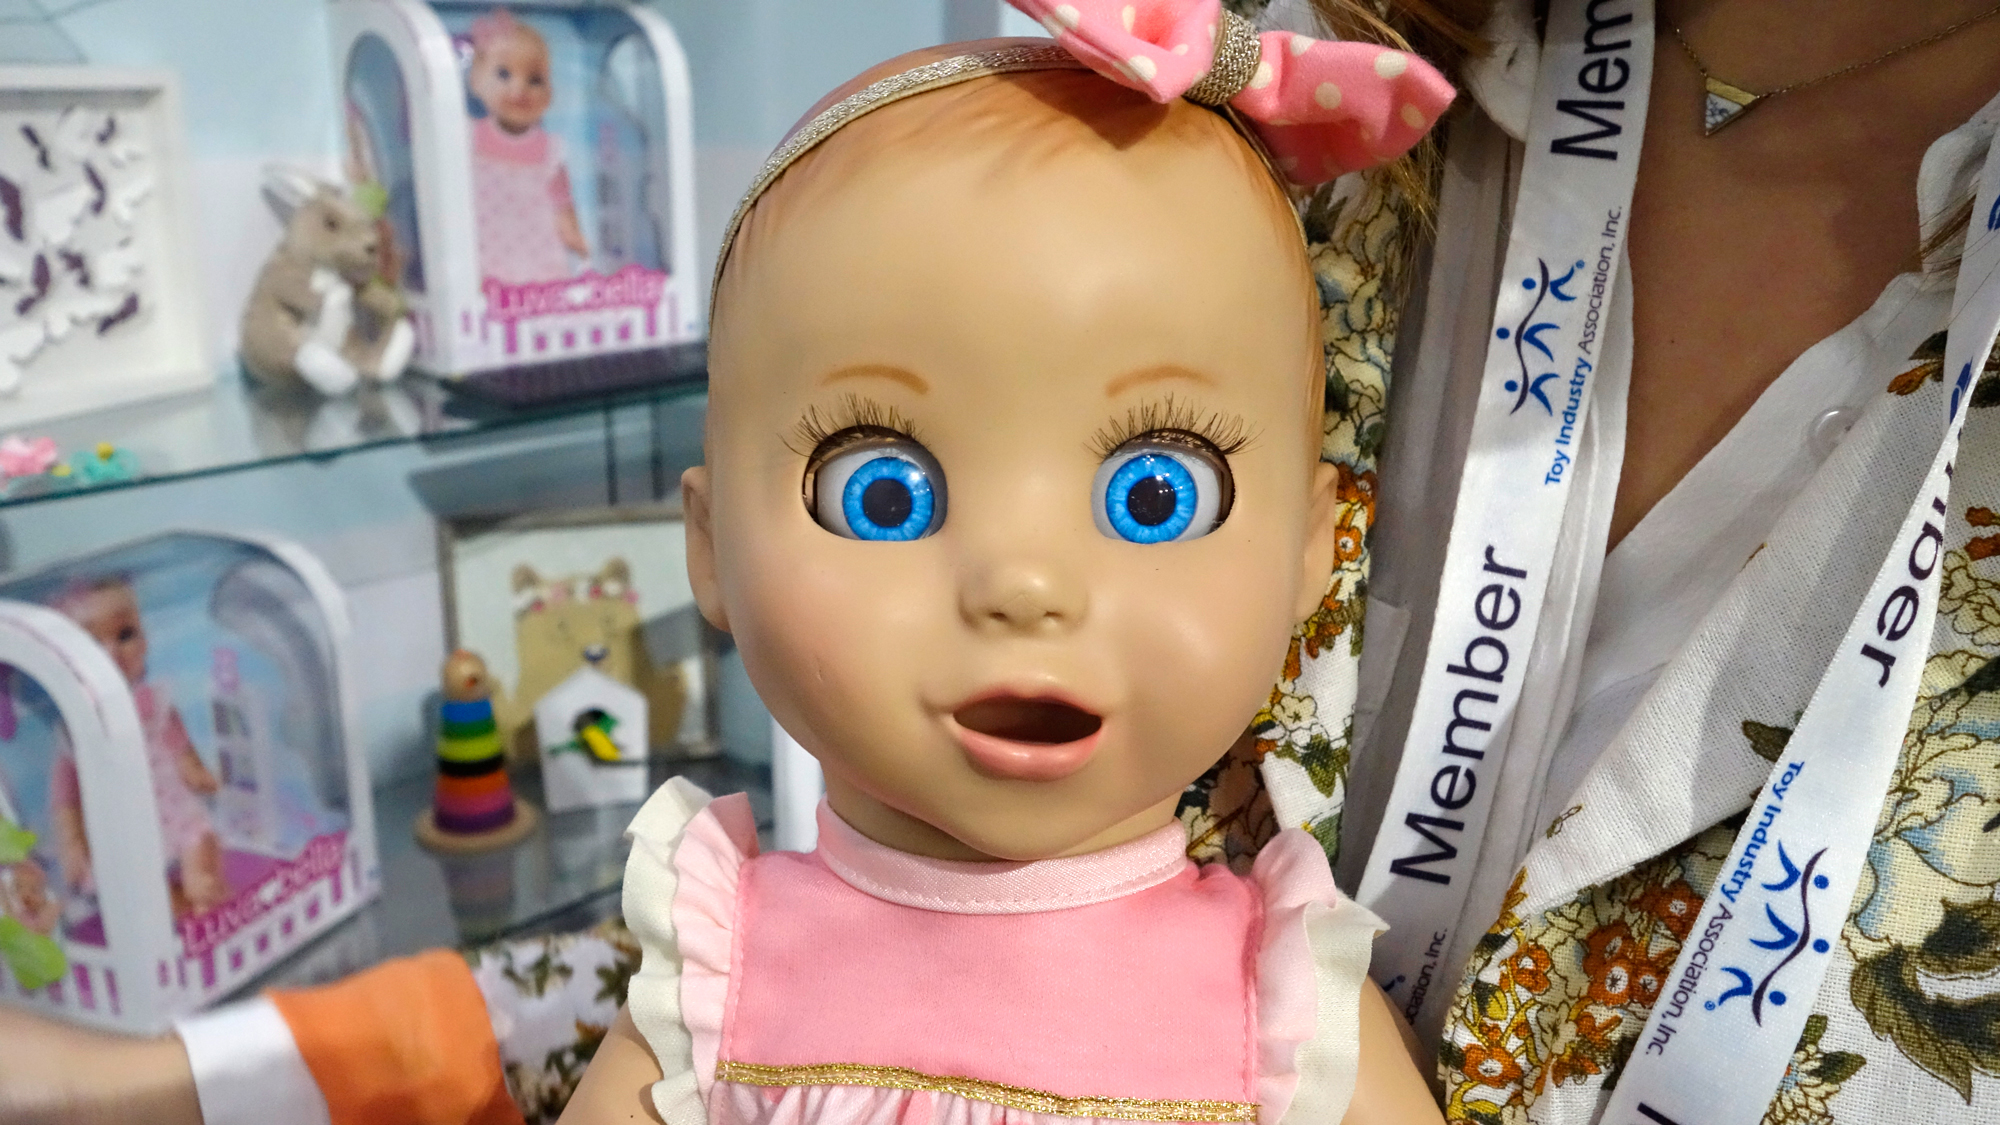 I May Have Accidentally Just Adopted A Remarkably Lifelike Robot Baby